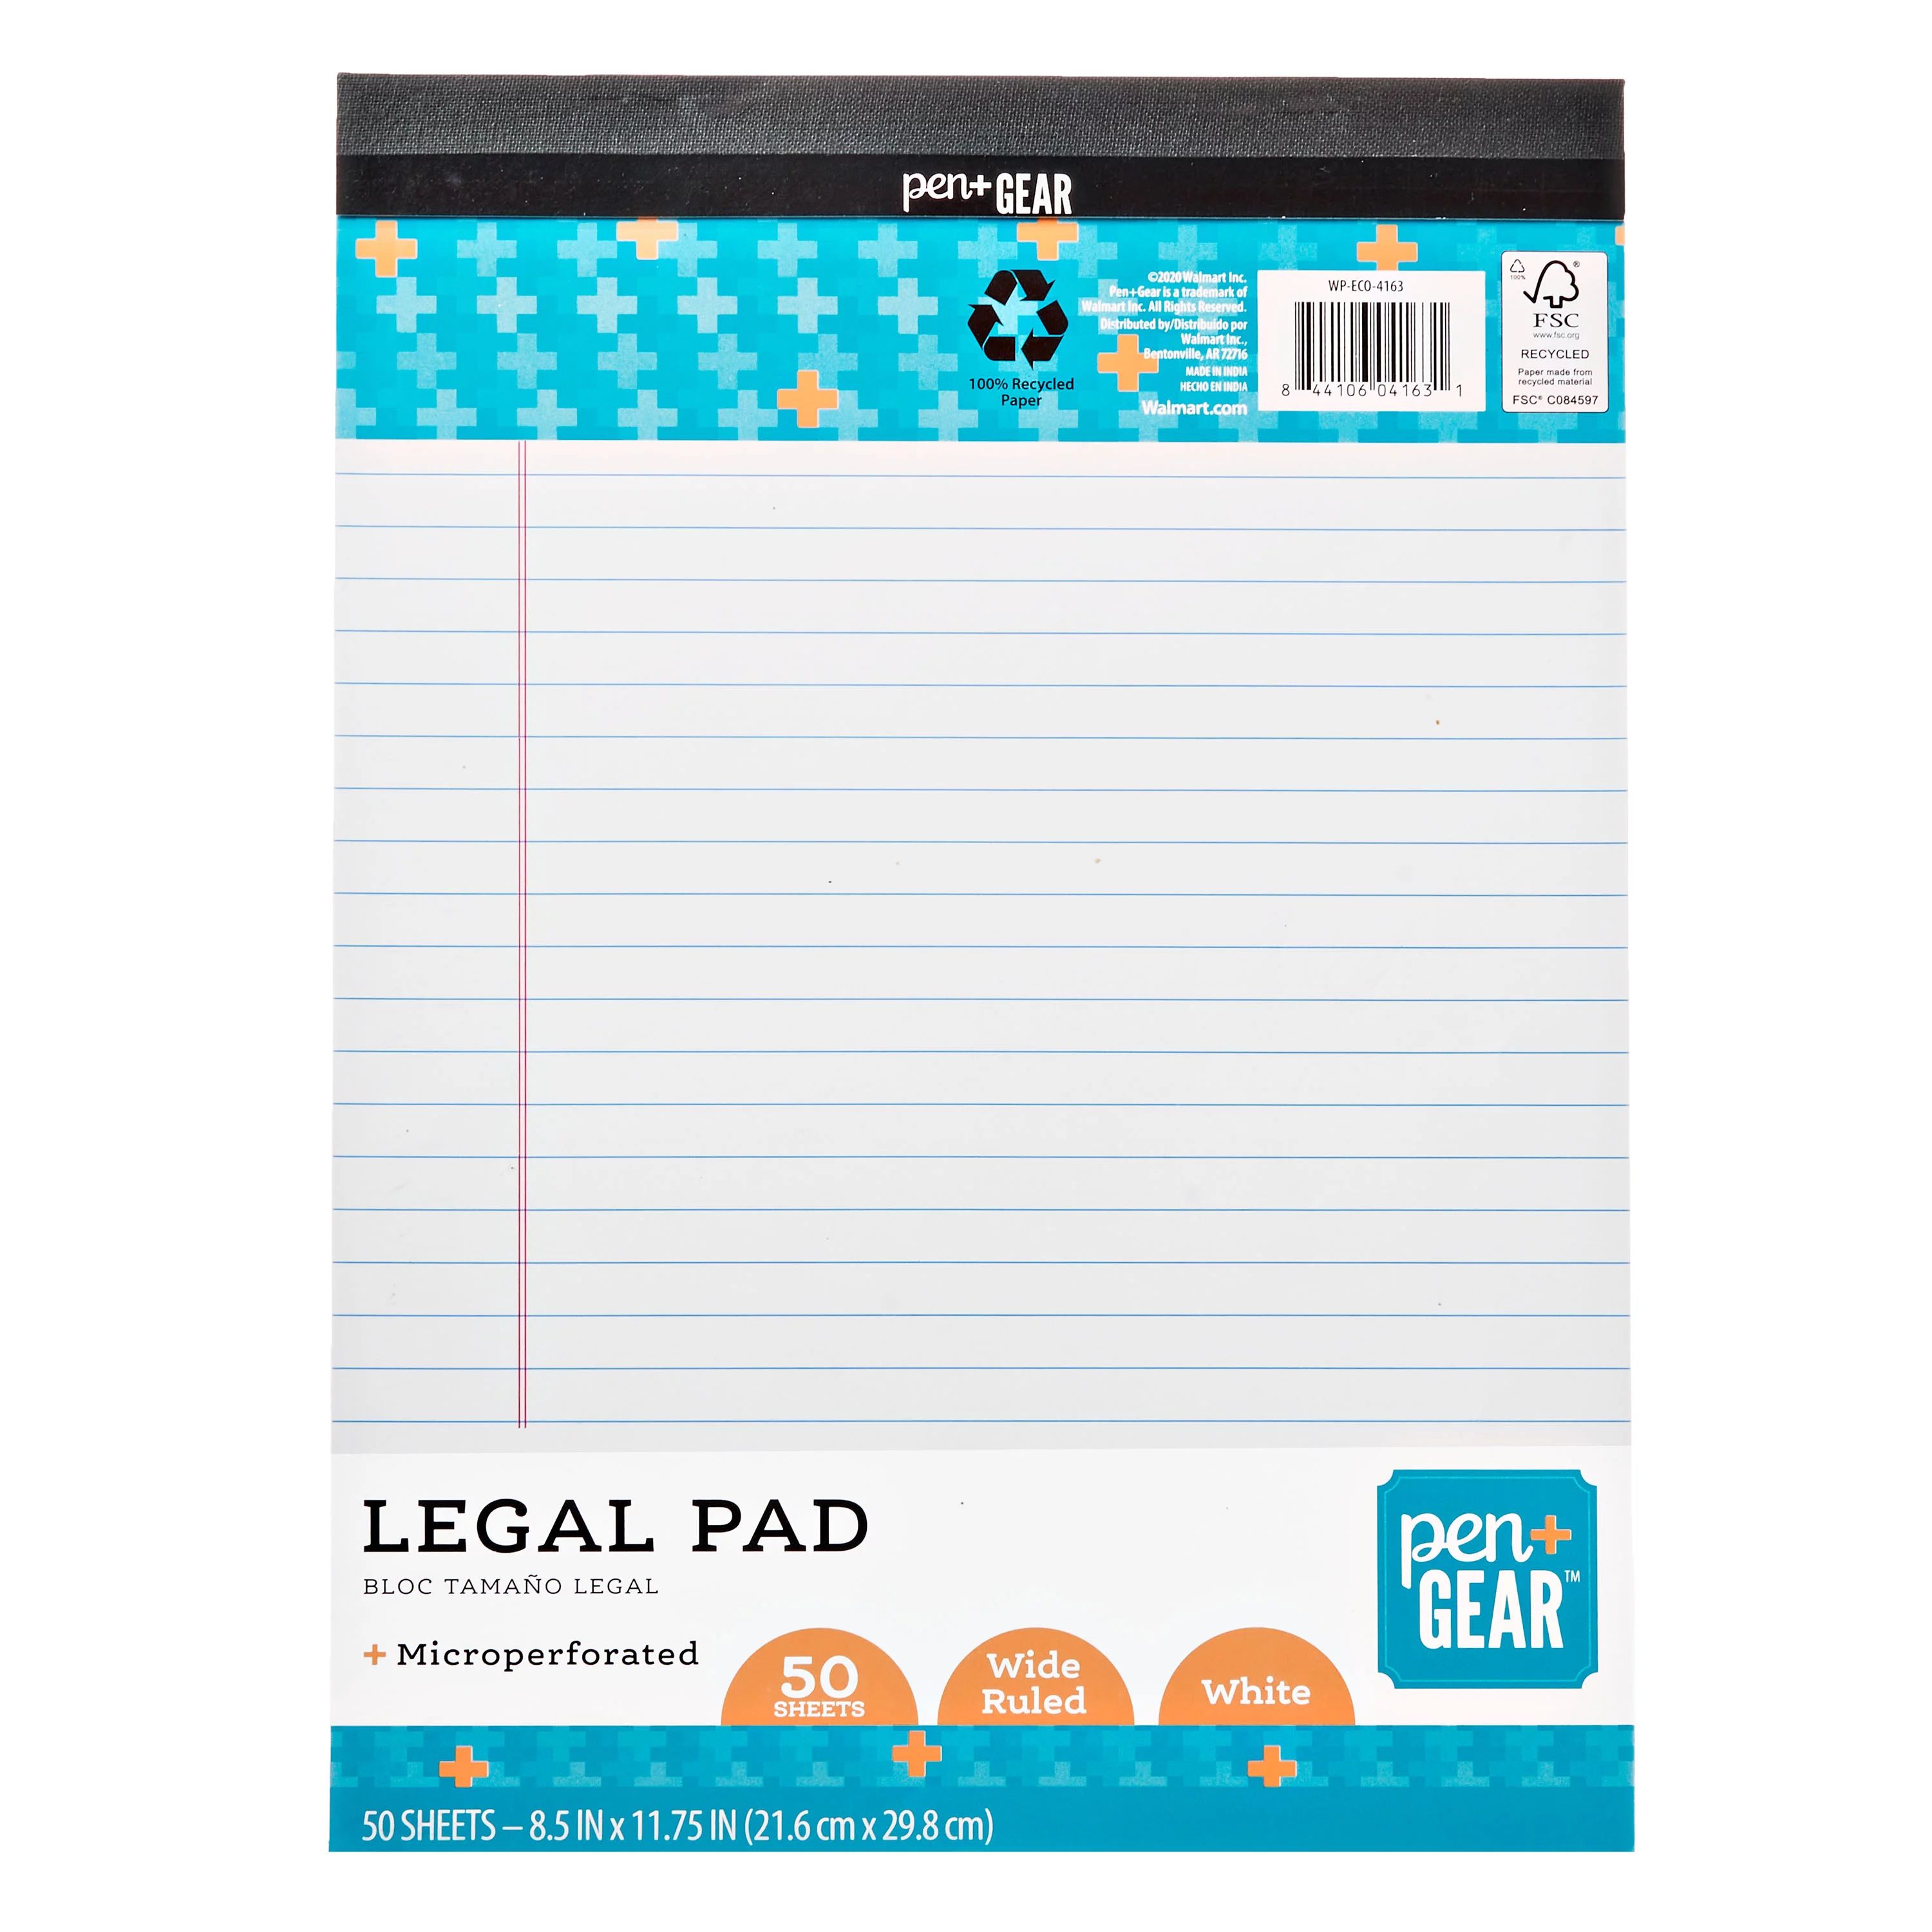 Pen + Gear Legal Pad, 8.5" x 11.75", 50 Sheets, Wide Ruled, White | Walmart (US)